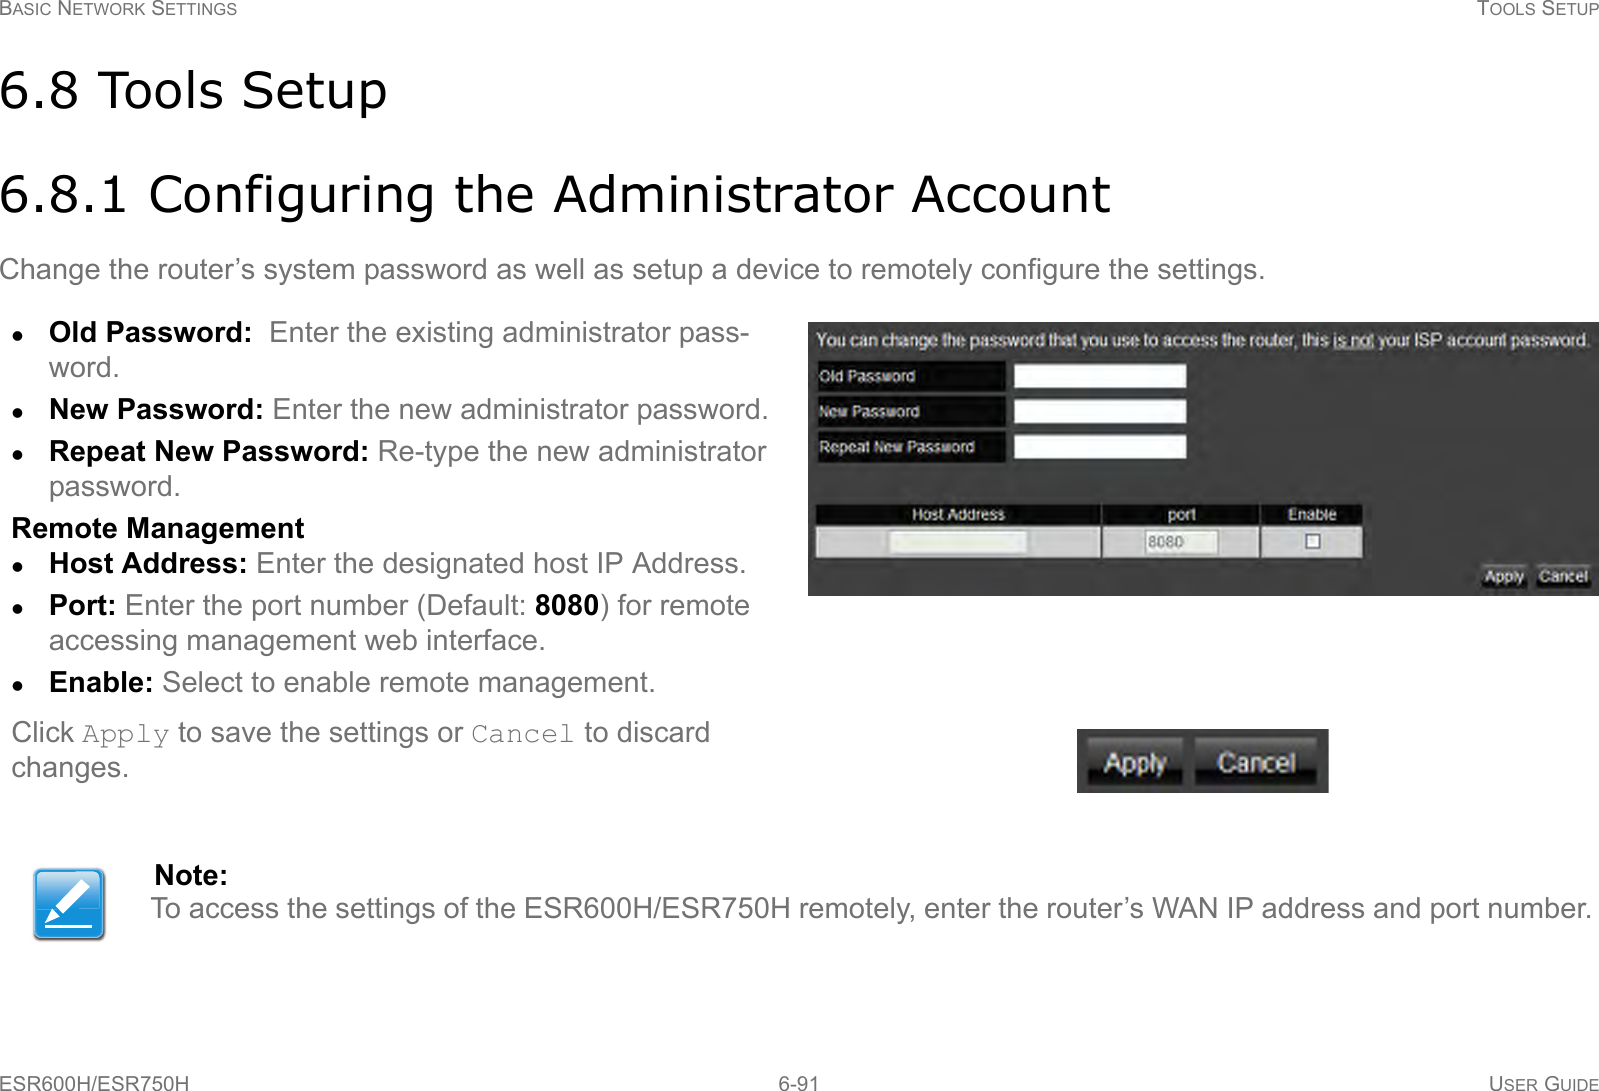 BASIC NETWORK SETTINGS TOOLS SETUPESR600H/ESR750H 6-91 USER GUIDE6.8 Tools Setup6.8.1 Configuring the Administrator AccountChange the router’s system password as well as setup a device to remotely configure the settings.Old Password:  Enter the existing administrator pass-word.New Password: Enter the new administrator password.Repeat New Password: Re-type the new administrator password.Remote ManagementHost Address: Enter the designated host IP Address.Port: Enter the port number (Default: 8080) for remote accessing management web interface. Enable: Select to enable remote management.Click Apply to save the settings or Cancel to discard changes.Note:To access the settings of the ESR600H/ESR750H remotely, enter the router’s WAN IP address and port number.